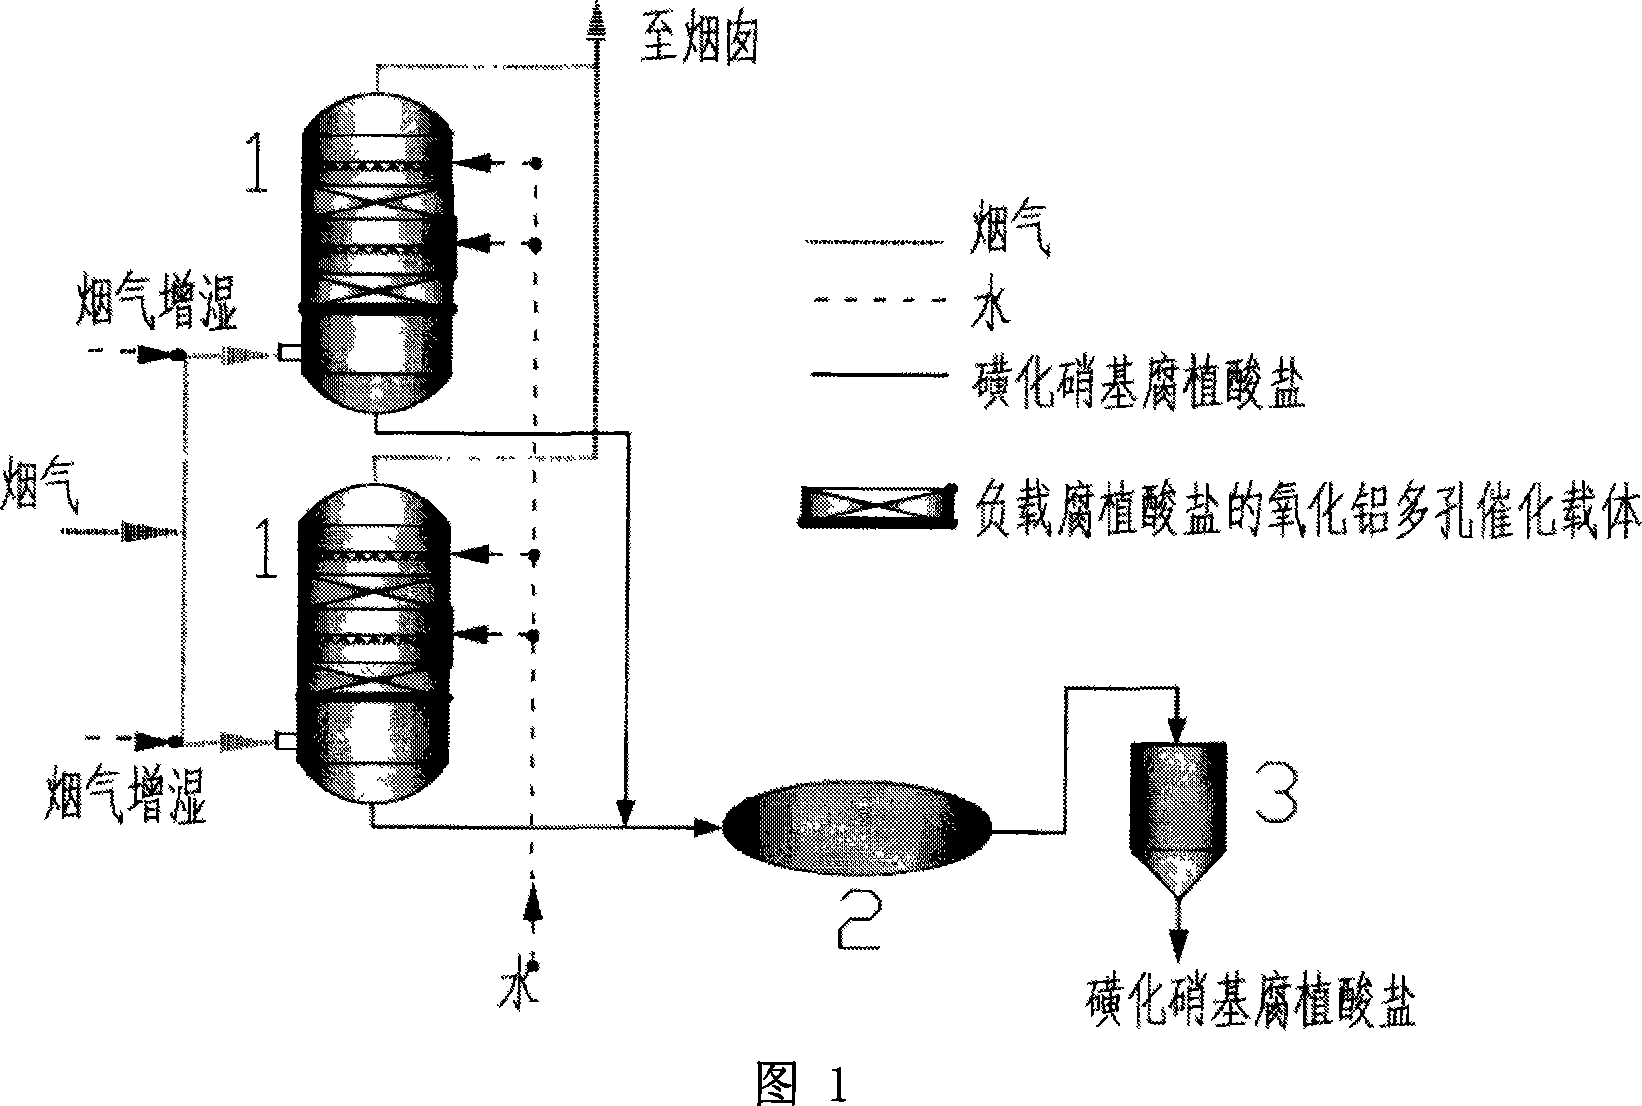 Method for producing compound fertilizer by using humates simultaneously desulfurizing and denitrating